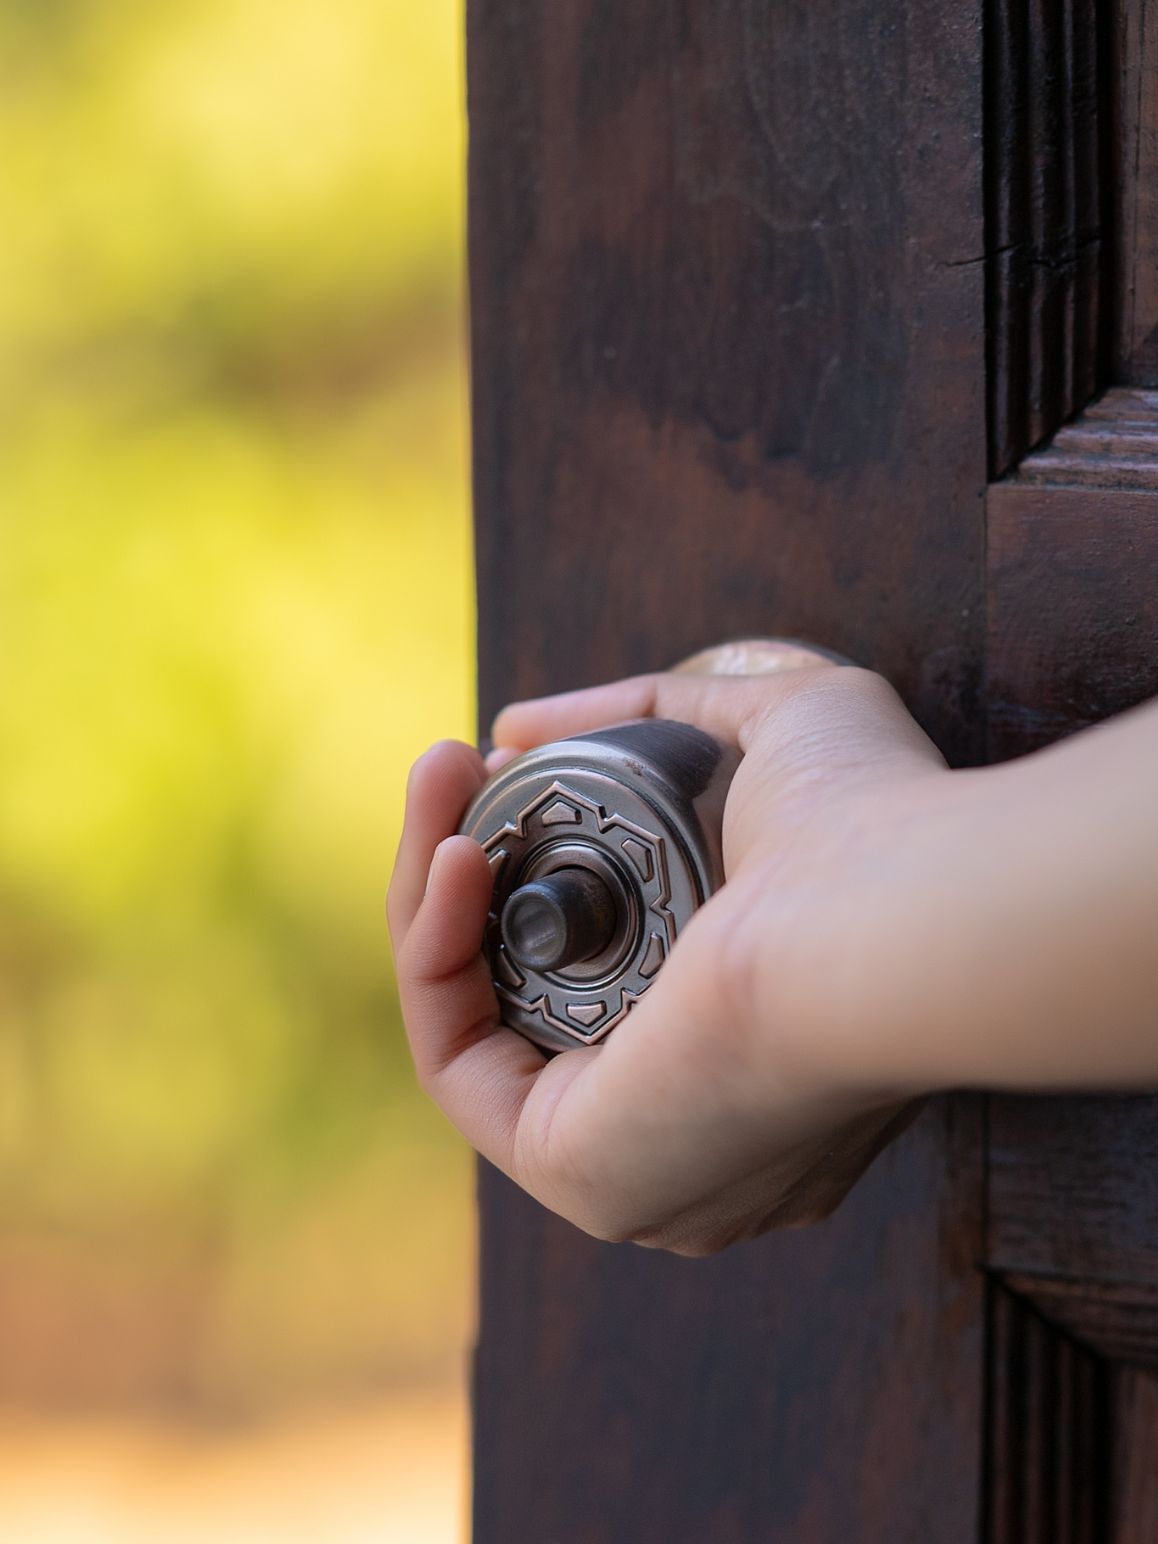 Hand opening up doorknob with outdoors in the background